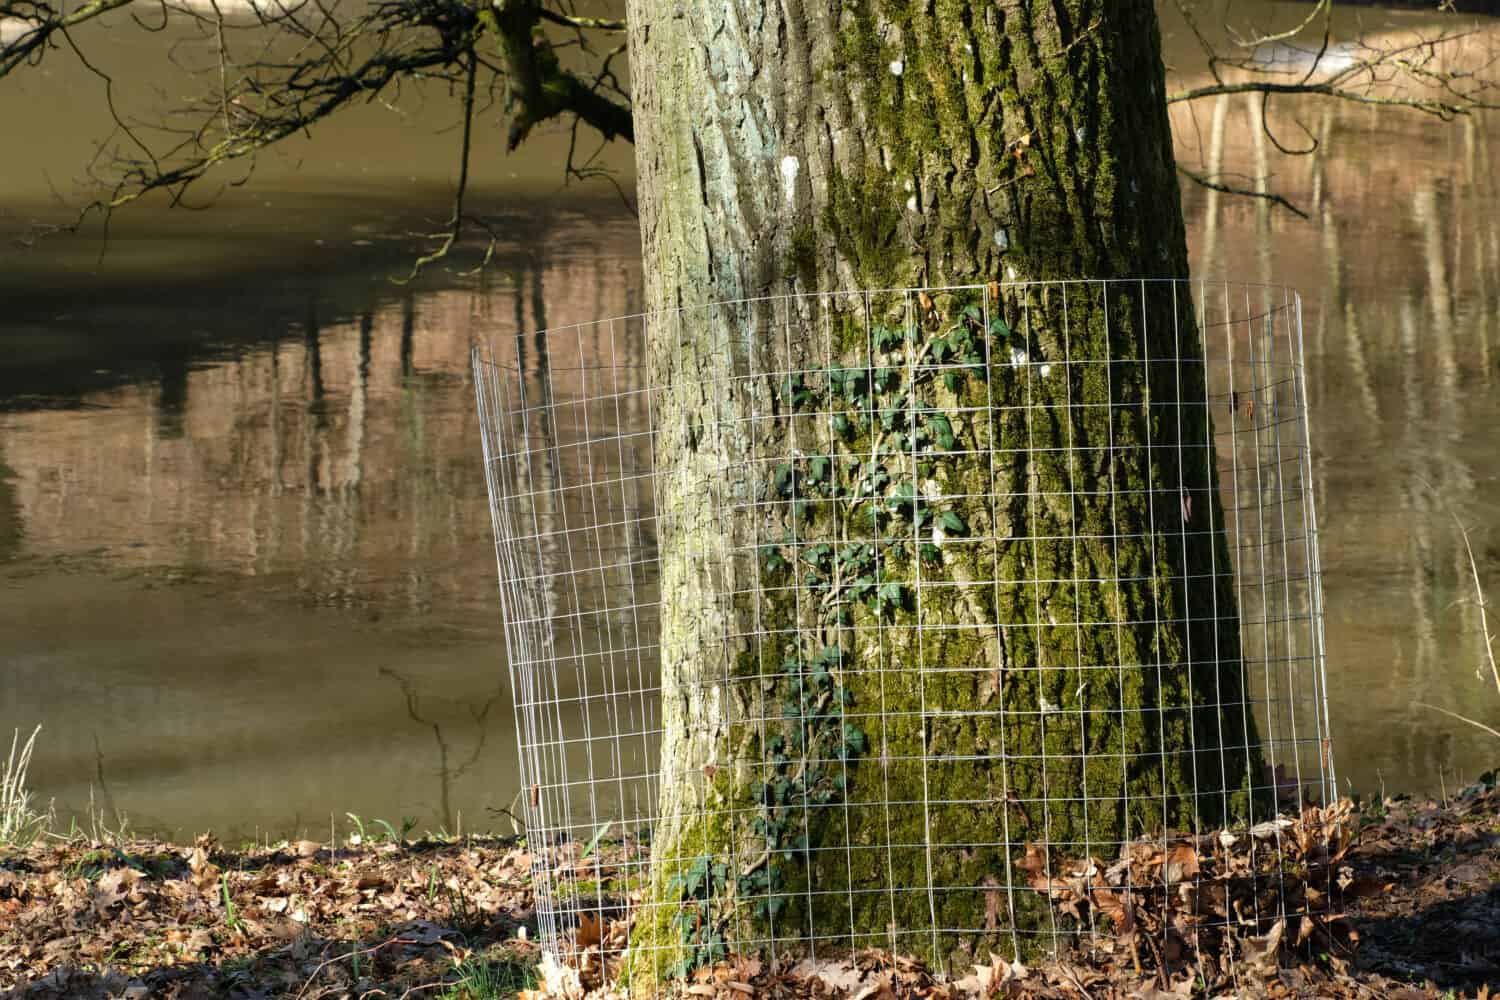 Steel mesh fencing to prevent beavers from chewing mature trees. Protect individual trees by wrapping them with heavy wire fencing around their bases. Expert lumberjacks can’t get their teeth on them.